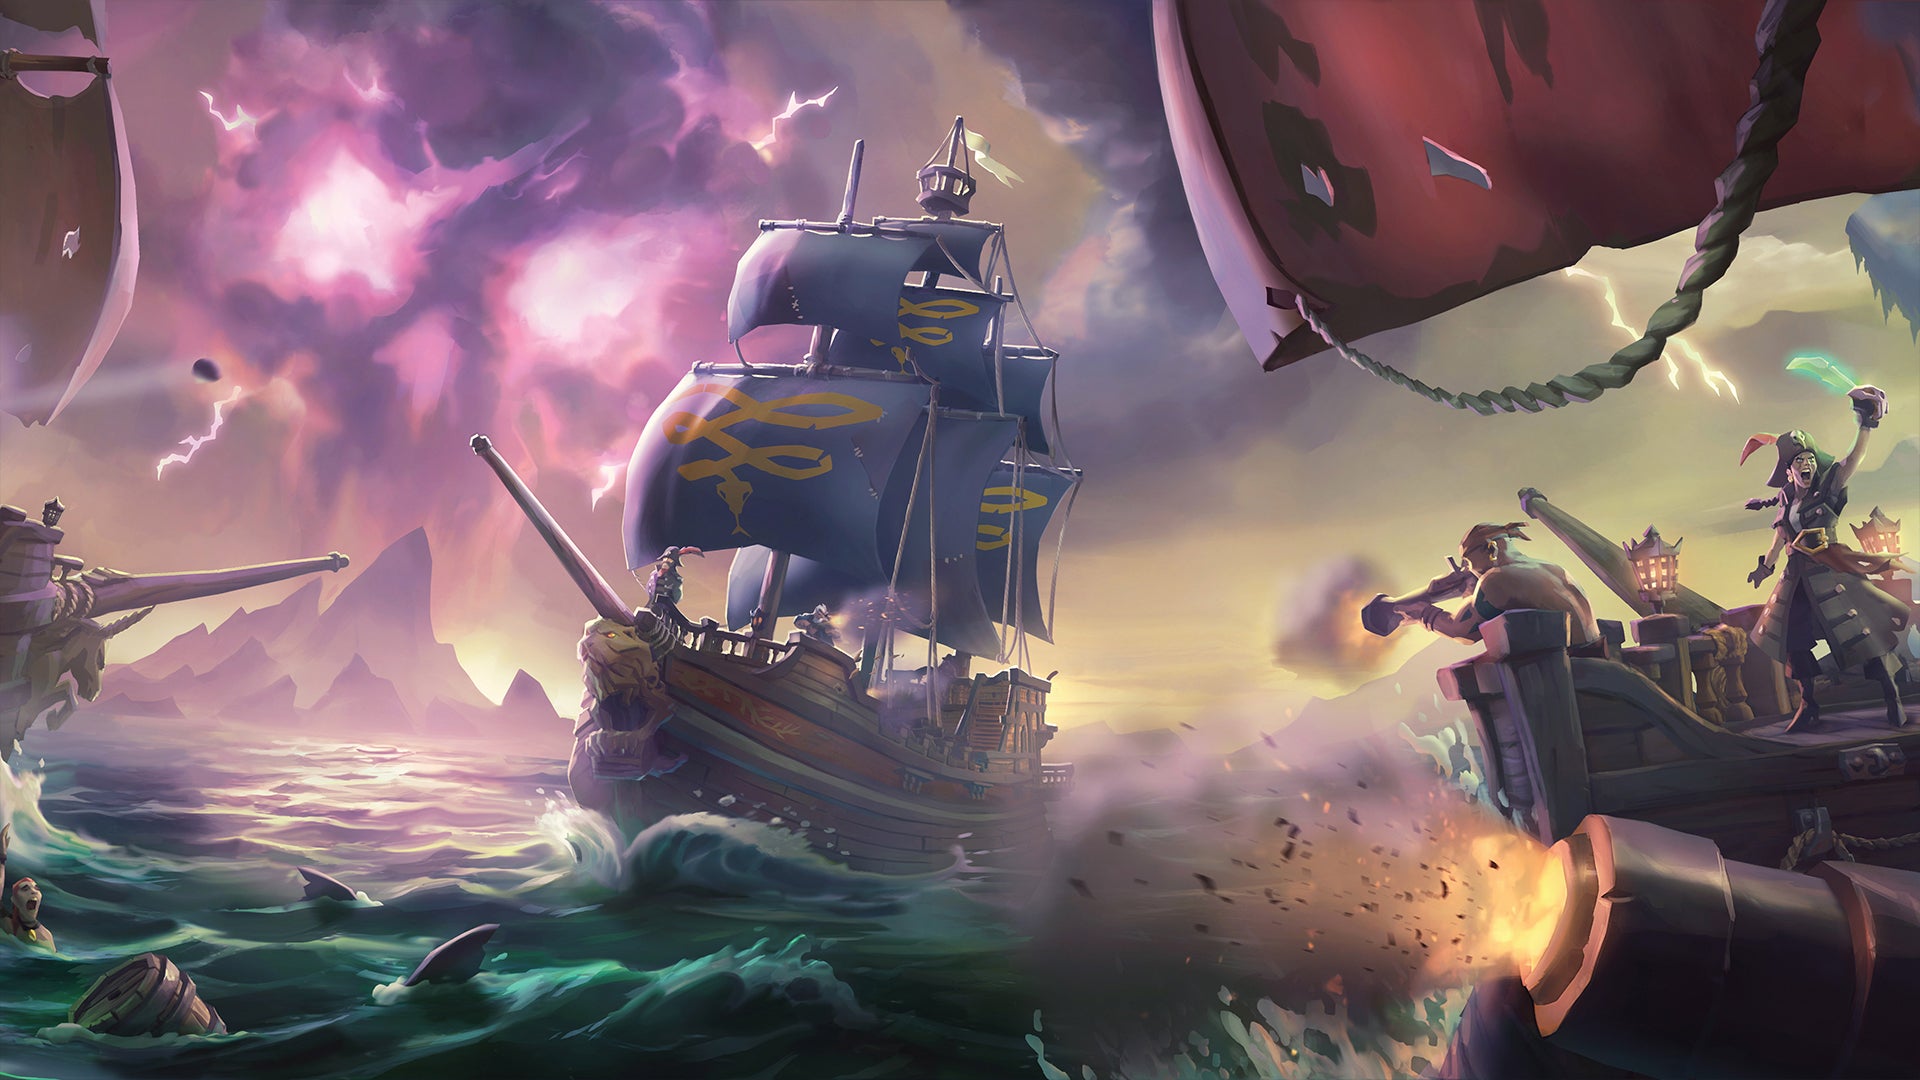 Image for 4K HDR! Sea of Thieves on Xbox One X!